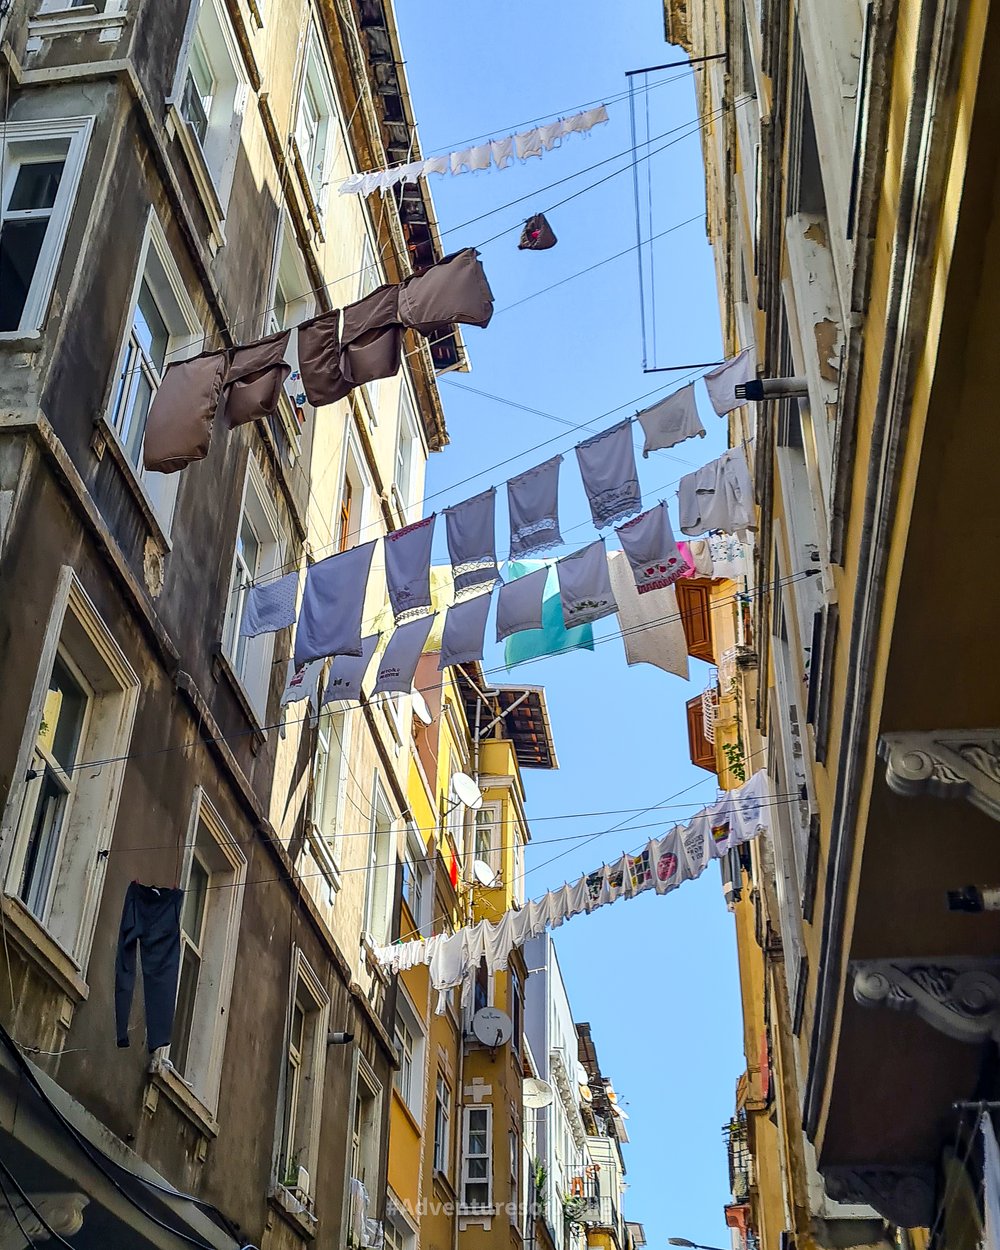 Galata and Beyoglu - Our guide to our temporary home in Istanbul ...